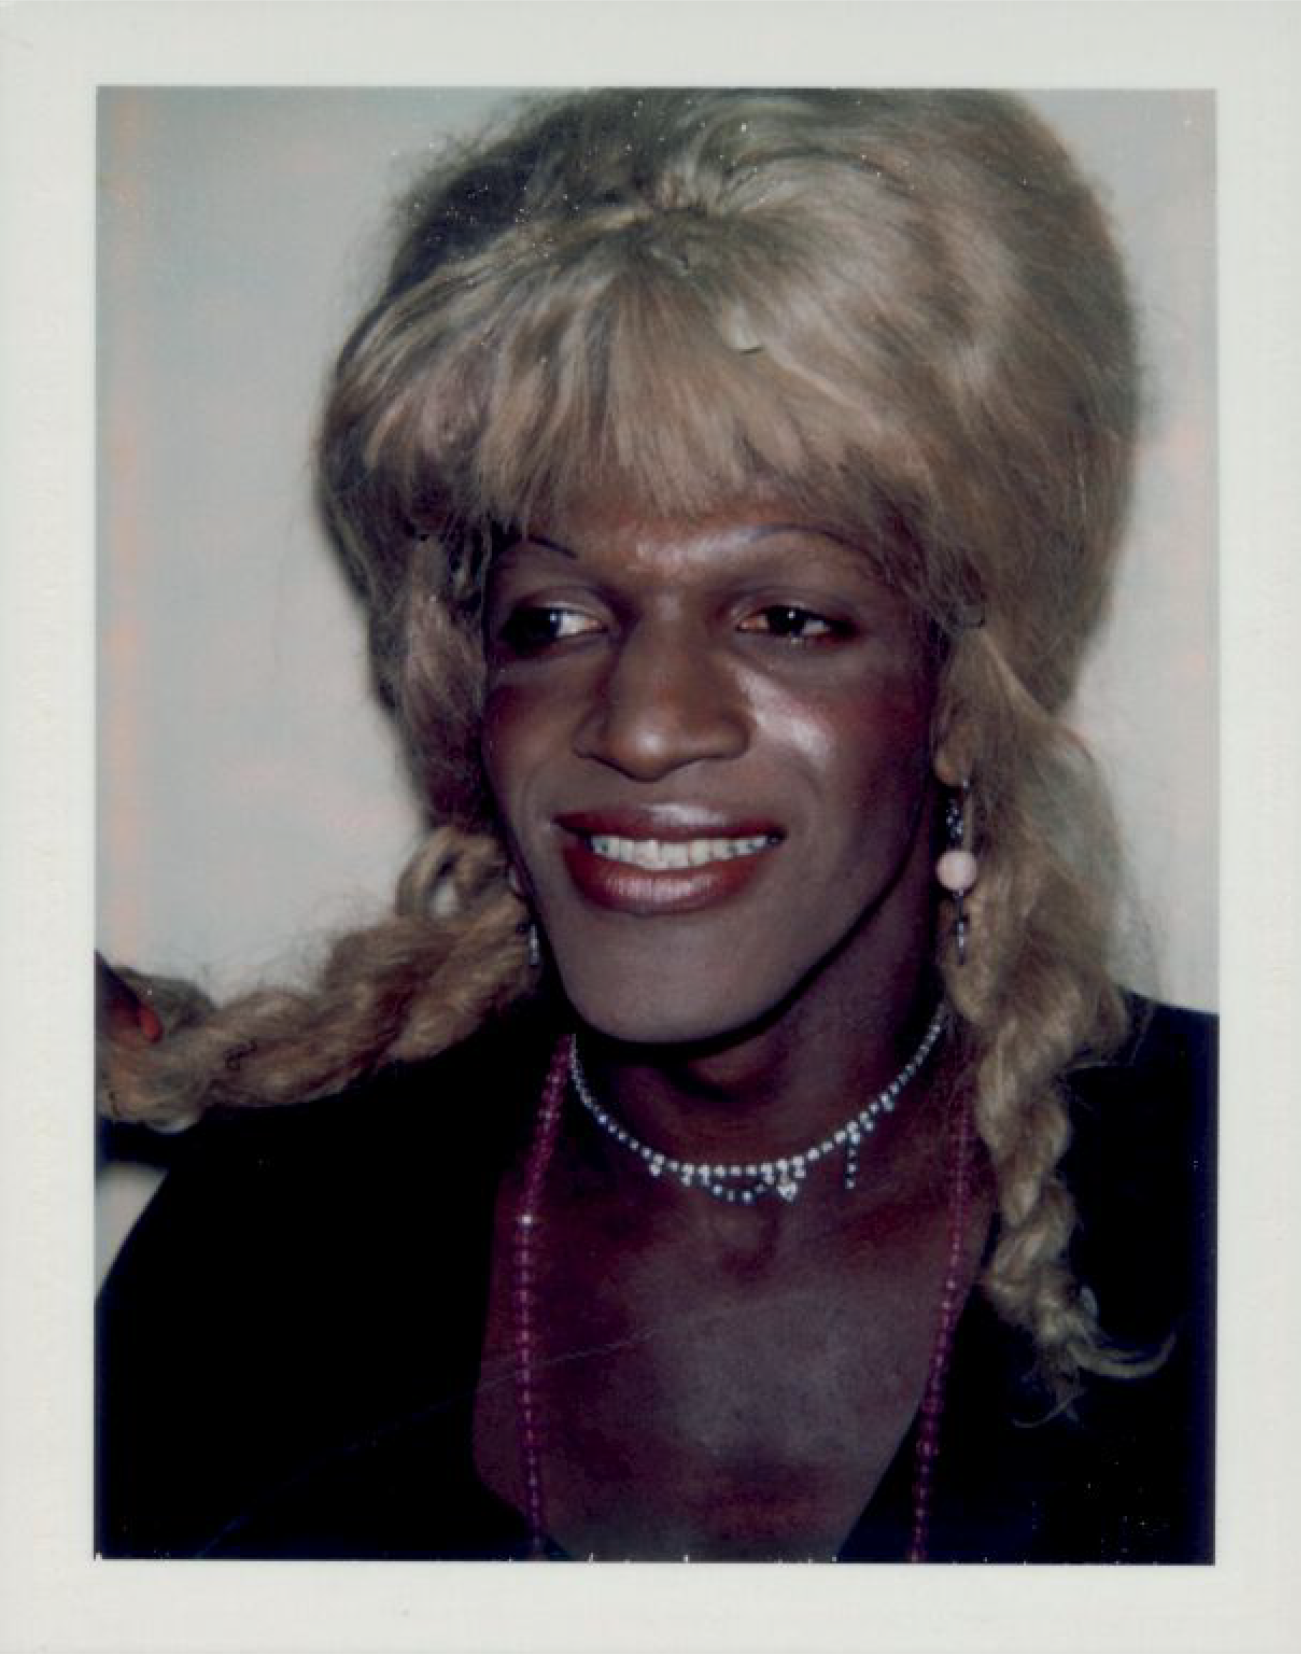 Ladies and Gentlemen (Marsha Johnson), 1974 unique Polaroid print © The Andy Warhol Foundation for the Visual Arts, Inc. Licensed by Artists Rights Society (ARS), New York.